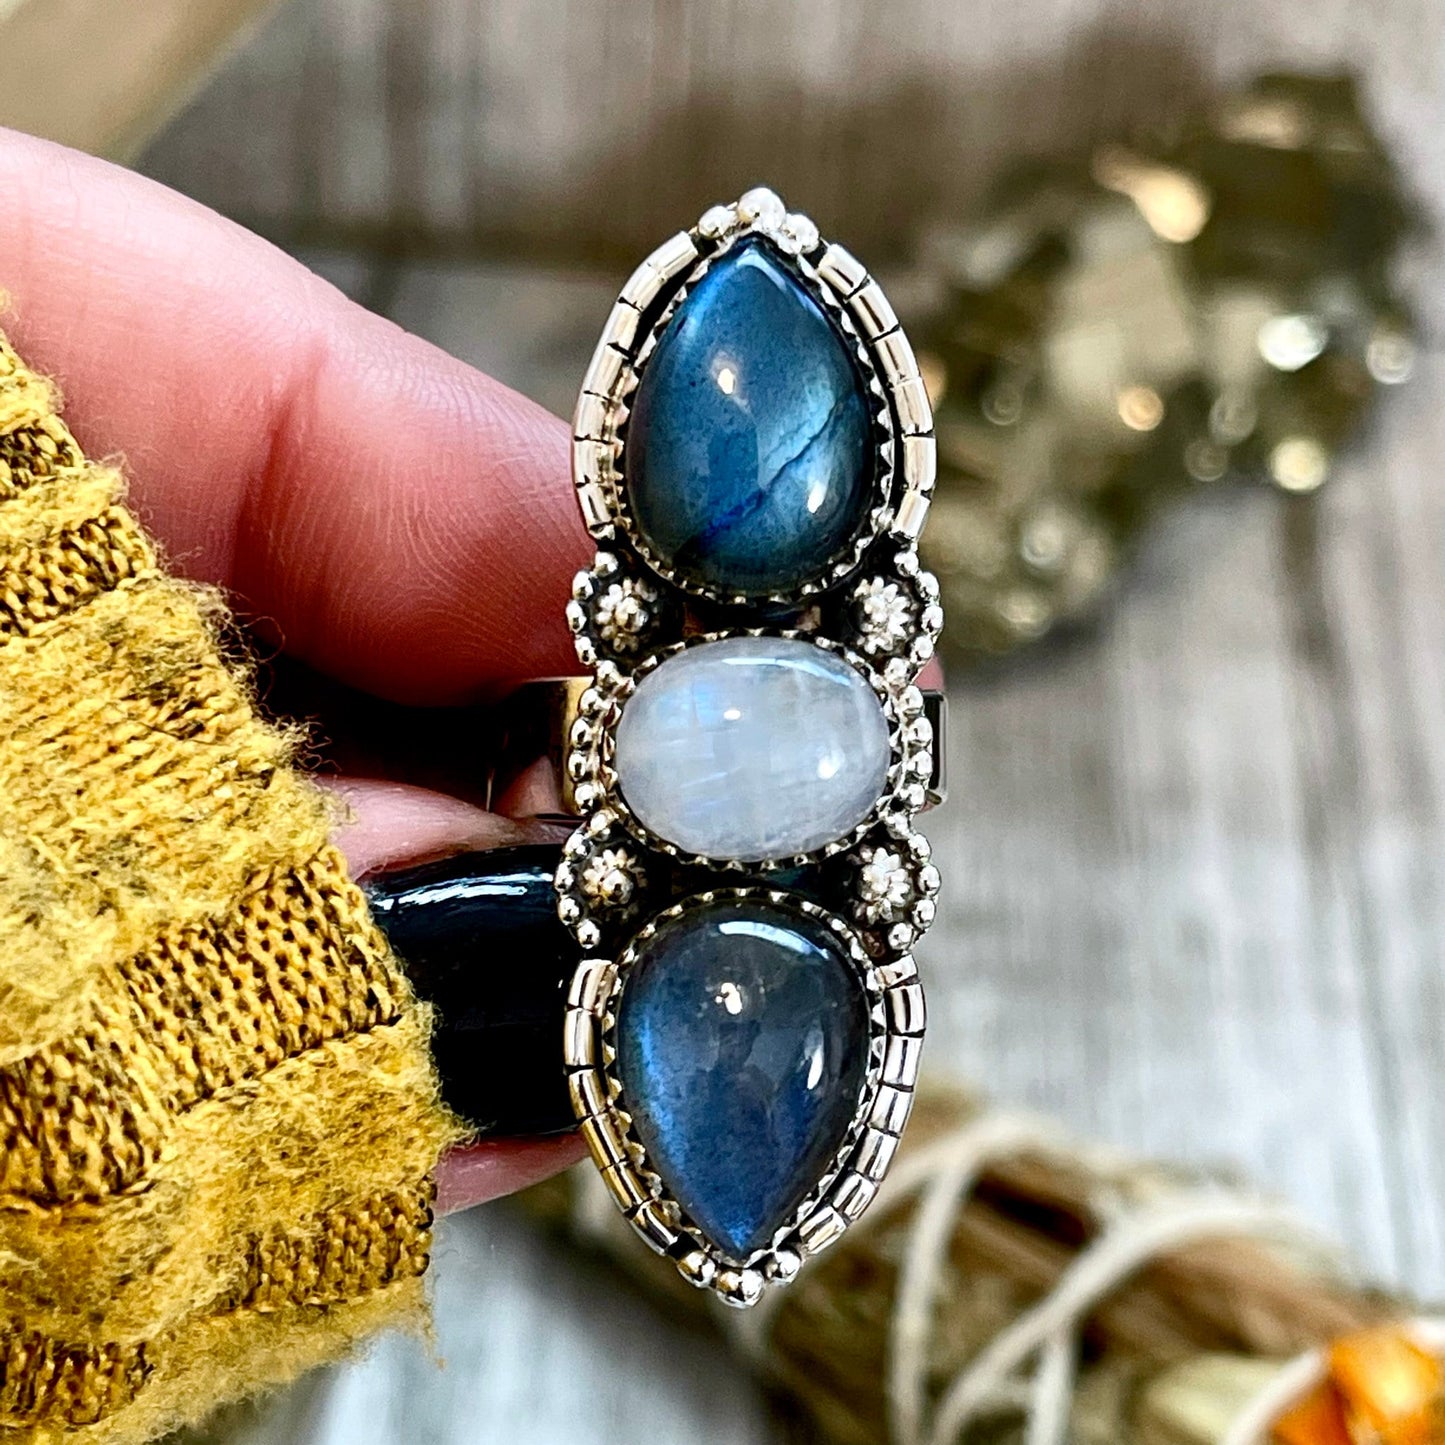 3 Stone Ring, Adjustable Ring, Big Crystal Ring, Big Stone Ring, Bohemian Ring, Boho Jewelry, Boho Ring, Etsy ID: 1333722547, Festival Jewelry, Foxlark- Rings, Gift For Woman, Jewelry, Labradorite Ring, Rainbow Moonstone, Rings, Statement Rings, Three Sto